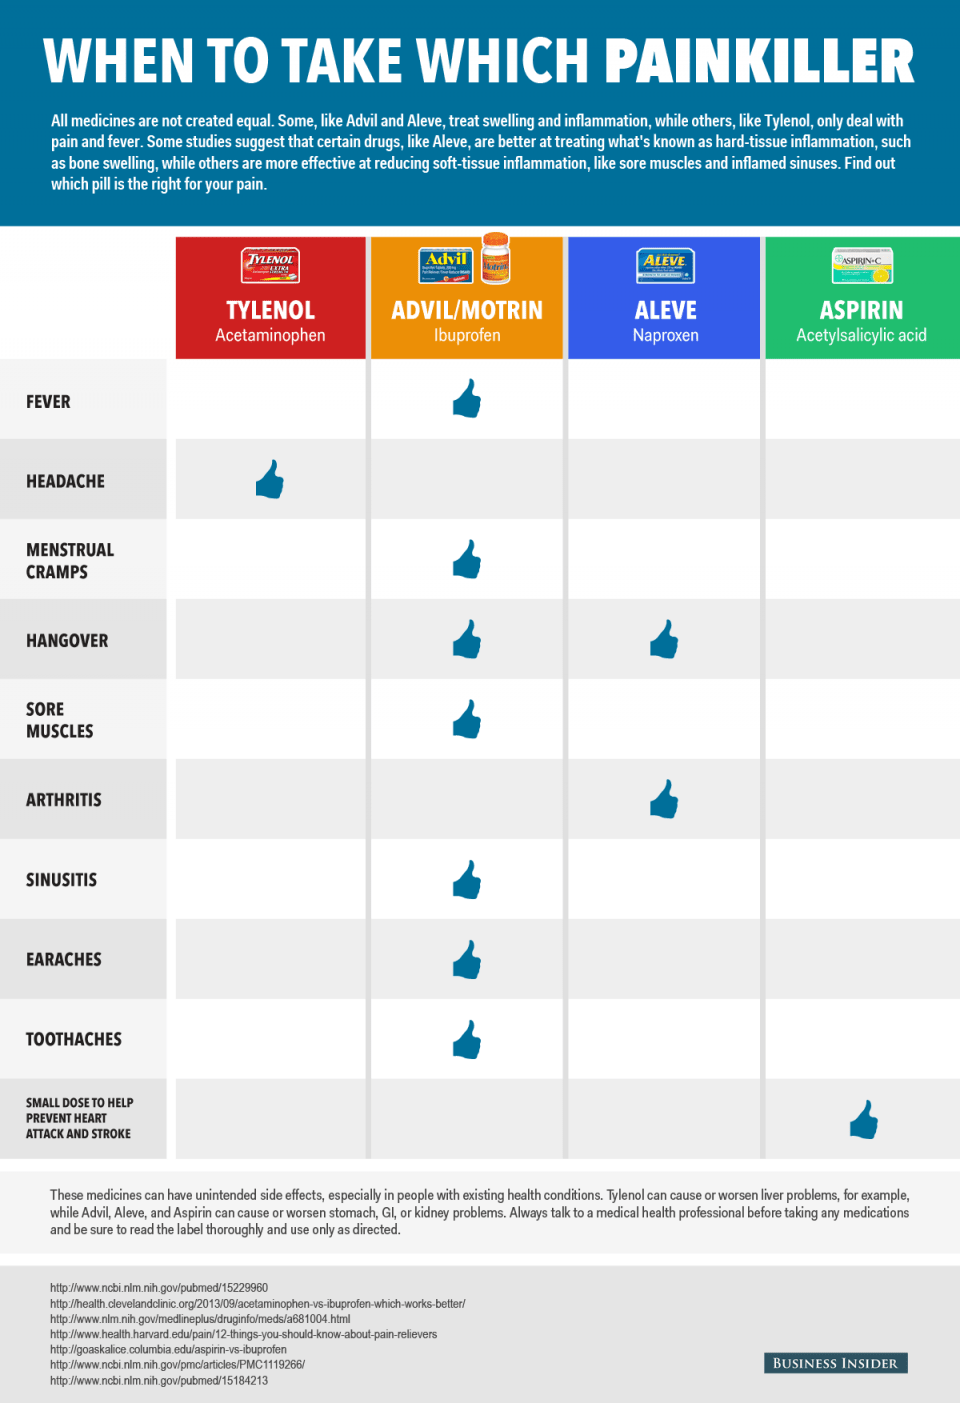 The main differences between Advil, Tylenol, Aleve, and Aspirin summed up in one chart